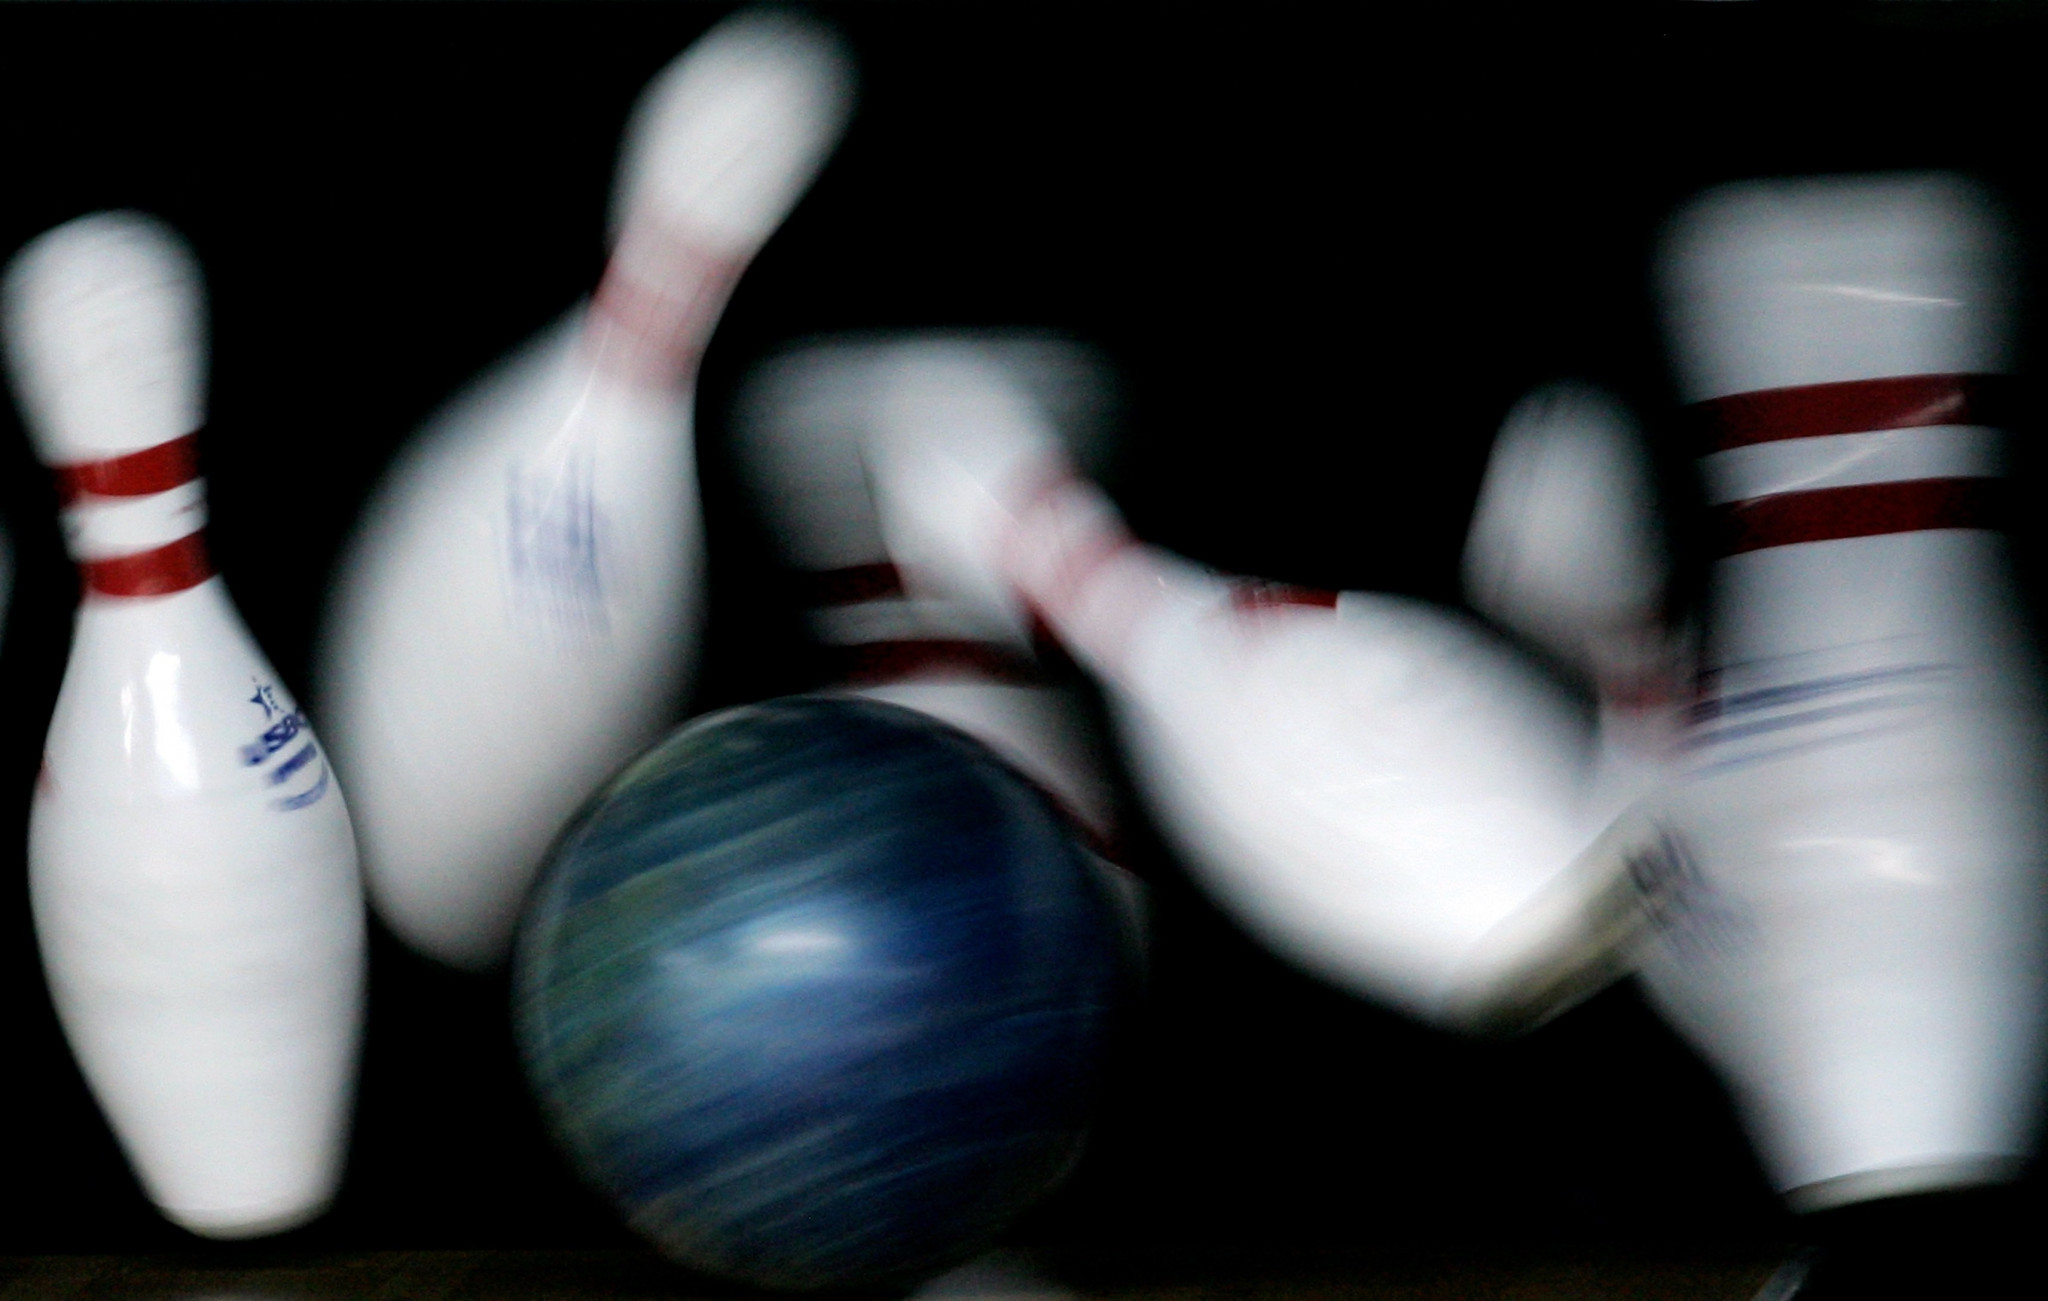 Men and women are due to compete for titles at the World Ninepin Bowling Championships ©Getty Images